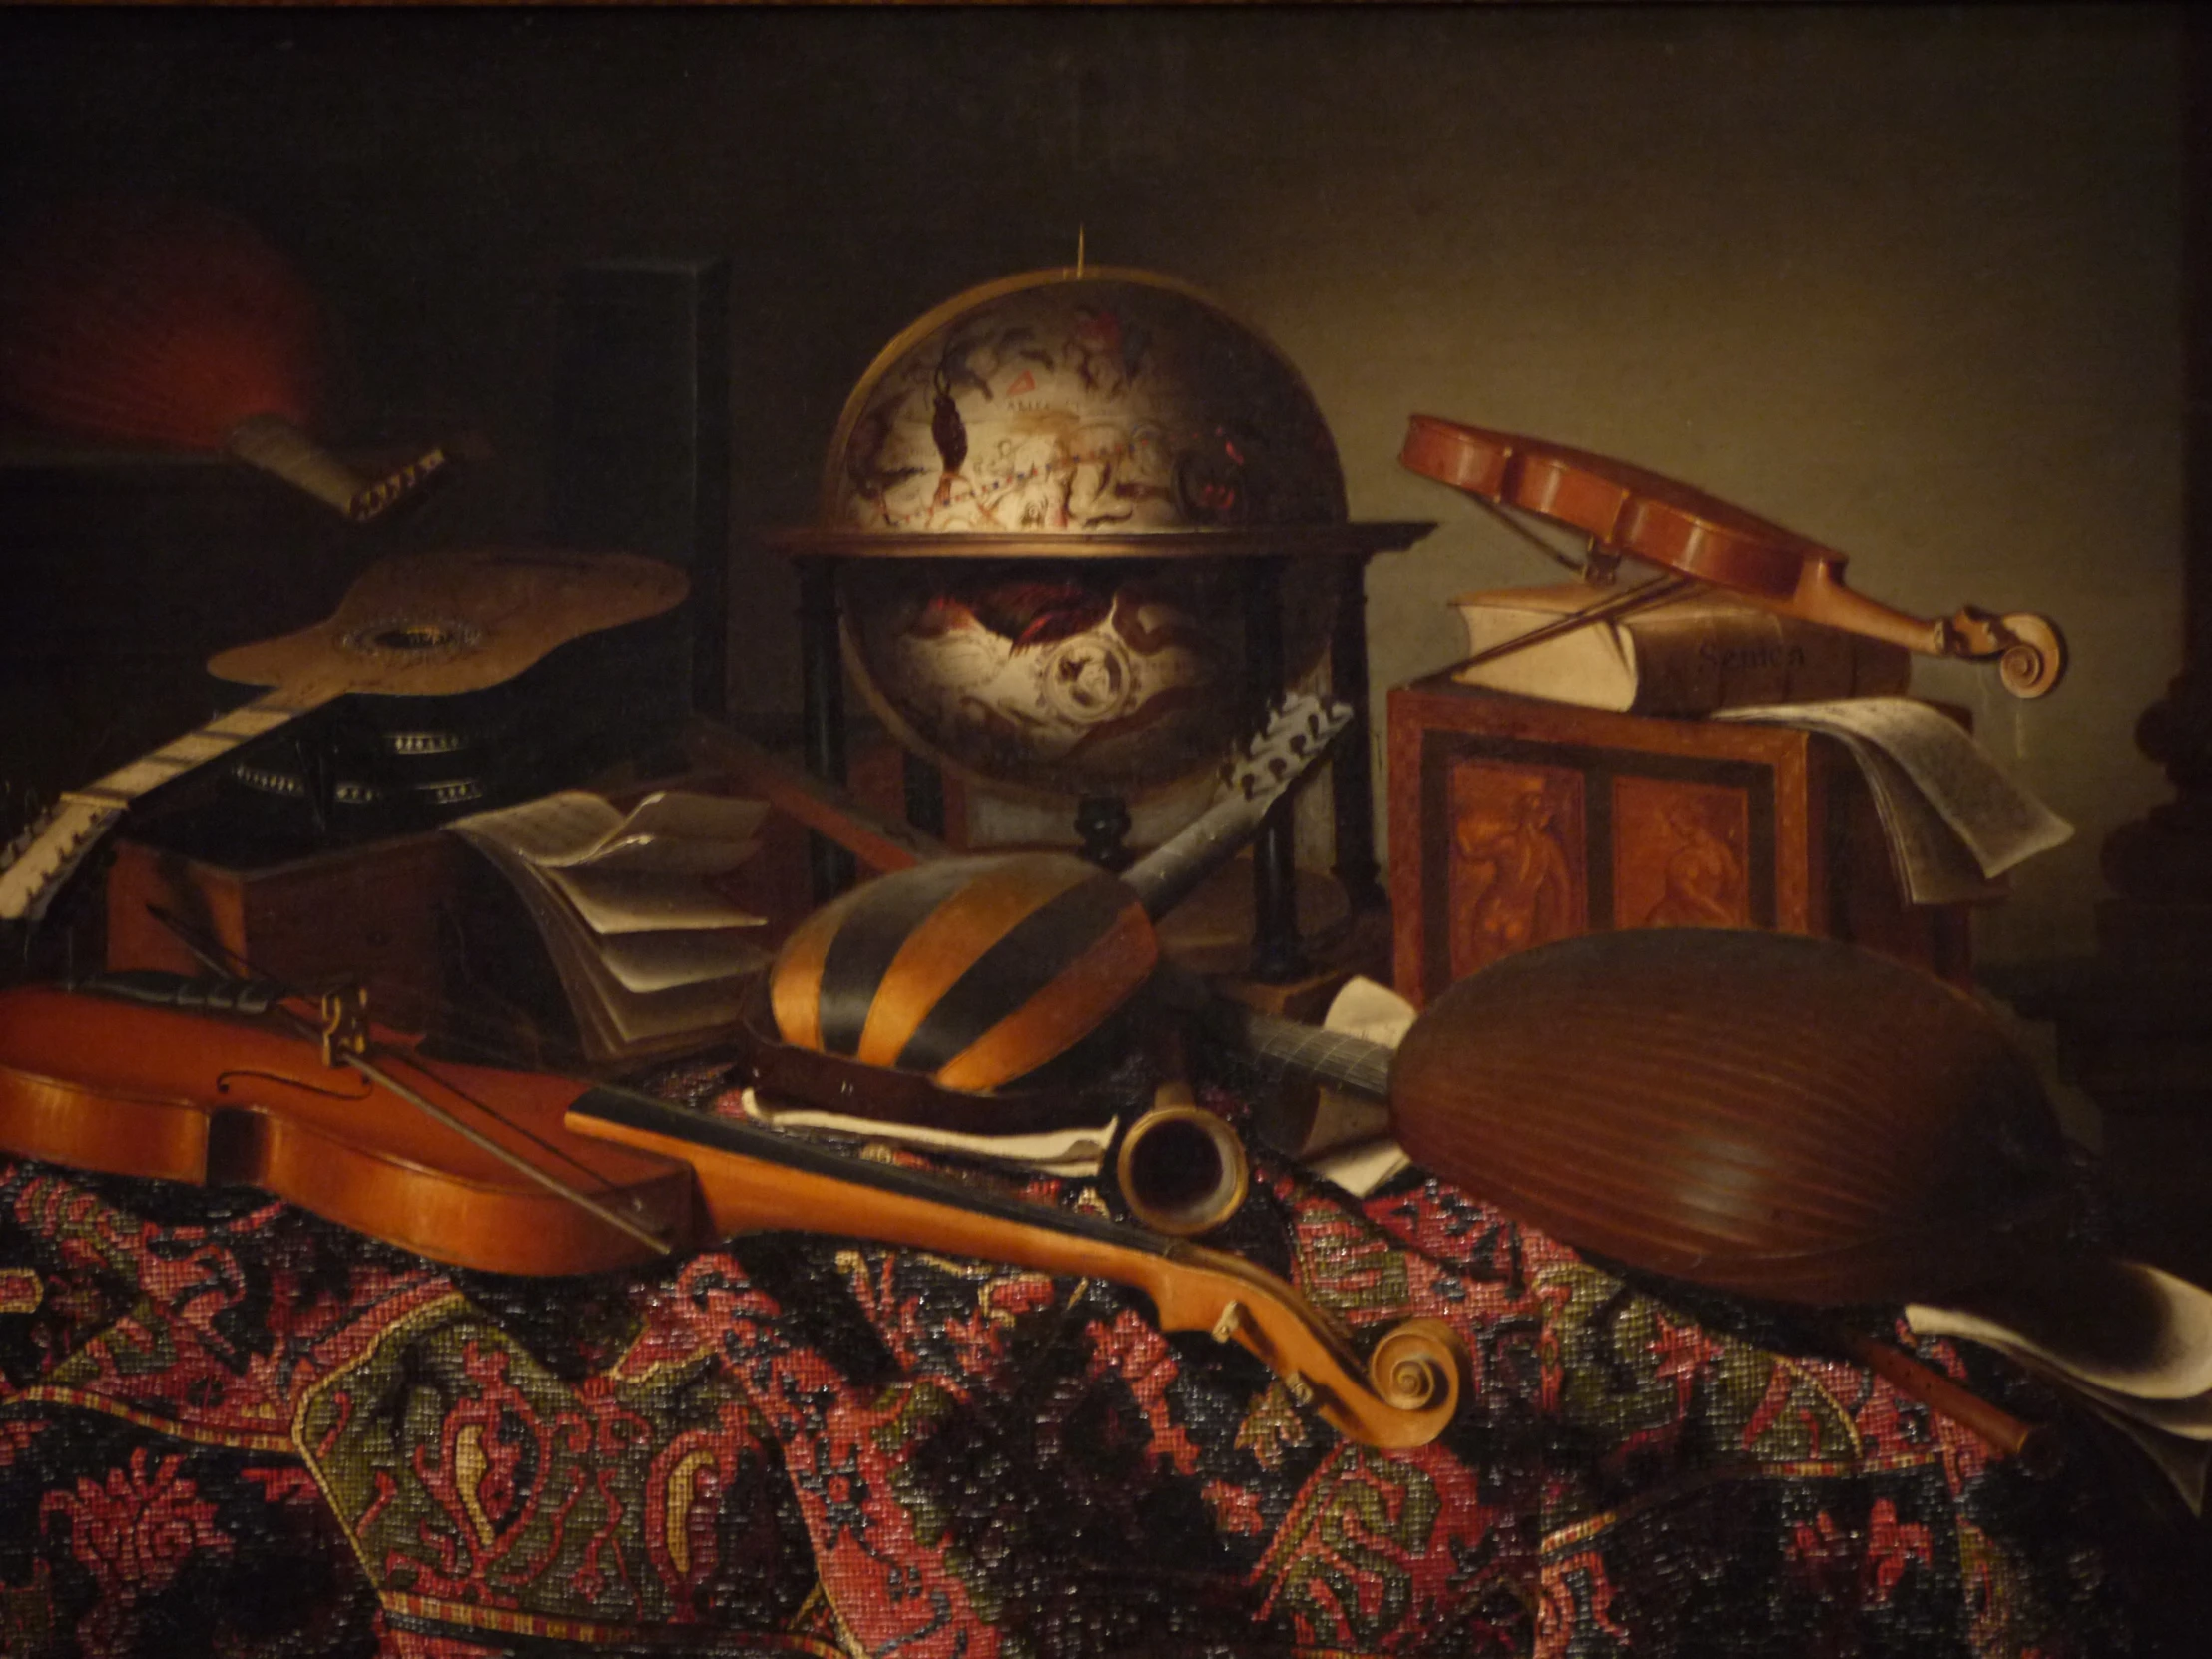 the guitar, musical instruments and box are next to the other objects